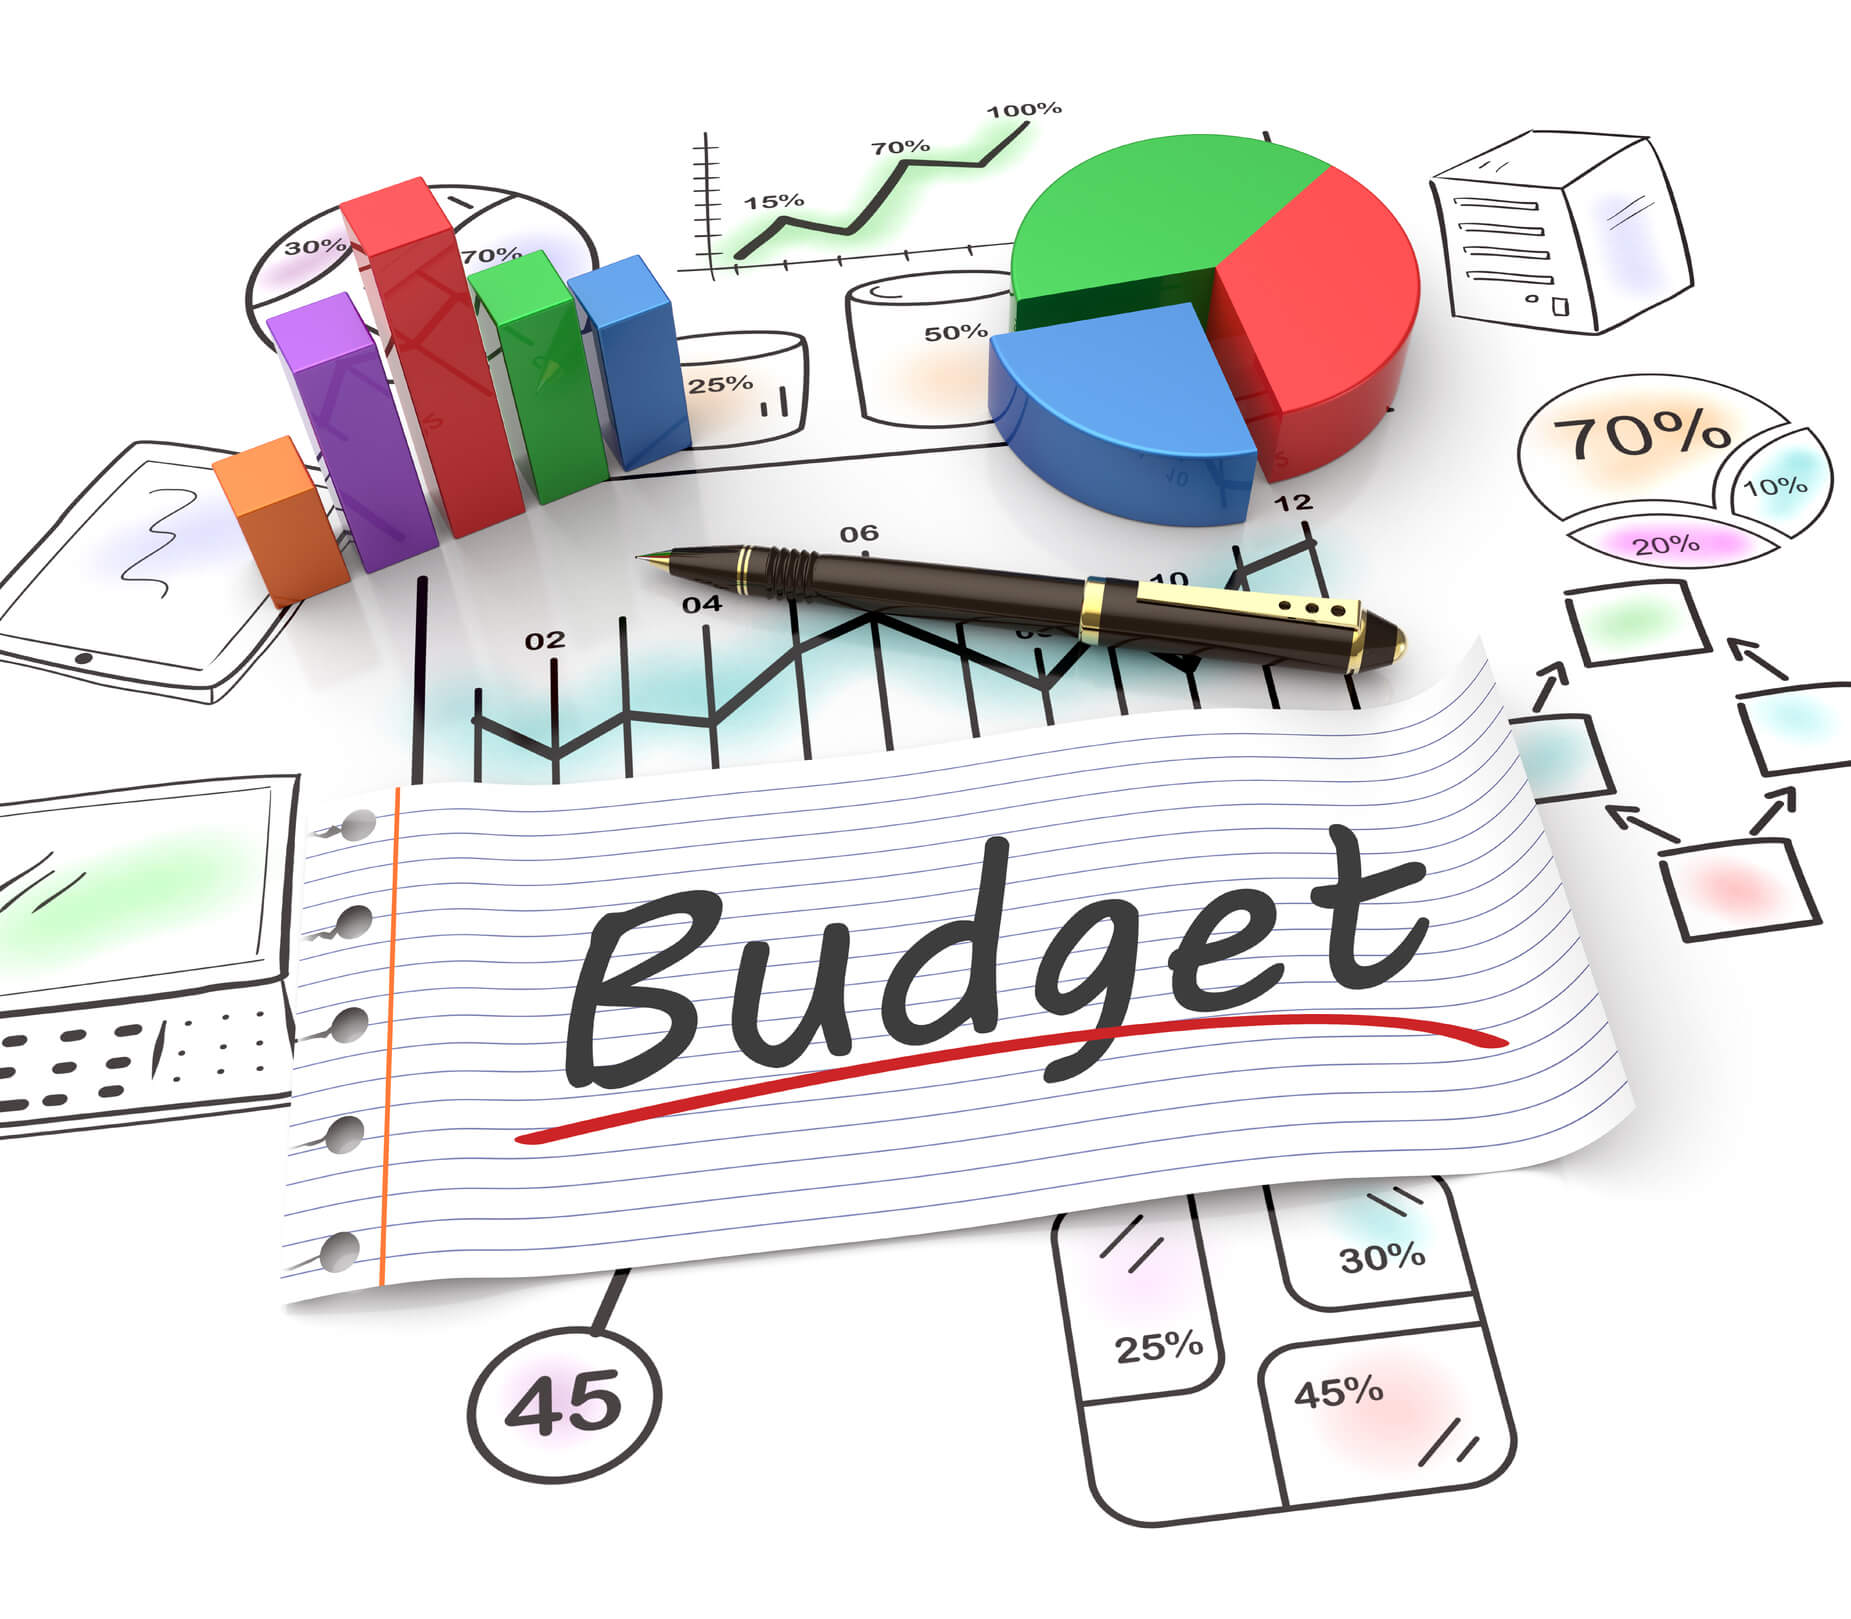 importance of budgeting - Complete Controller